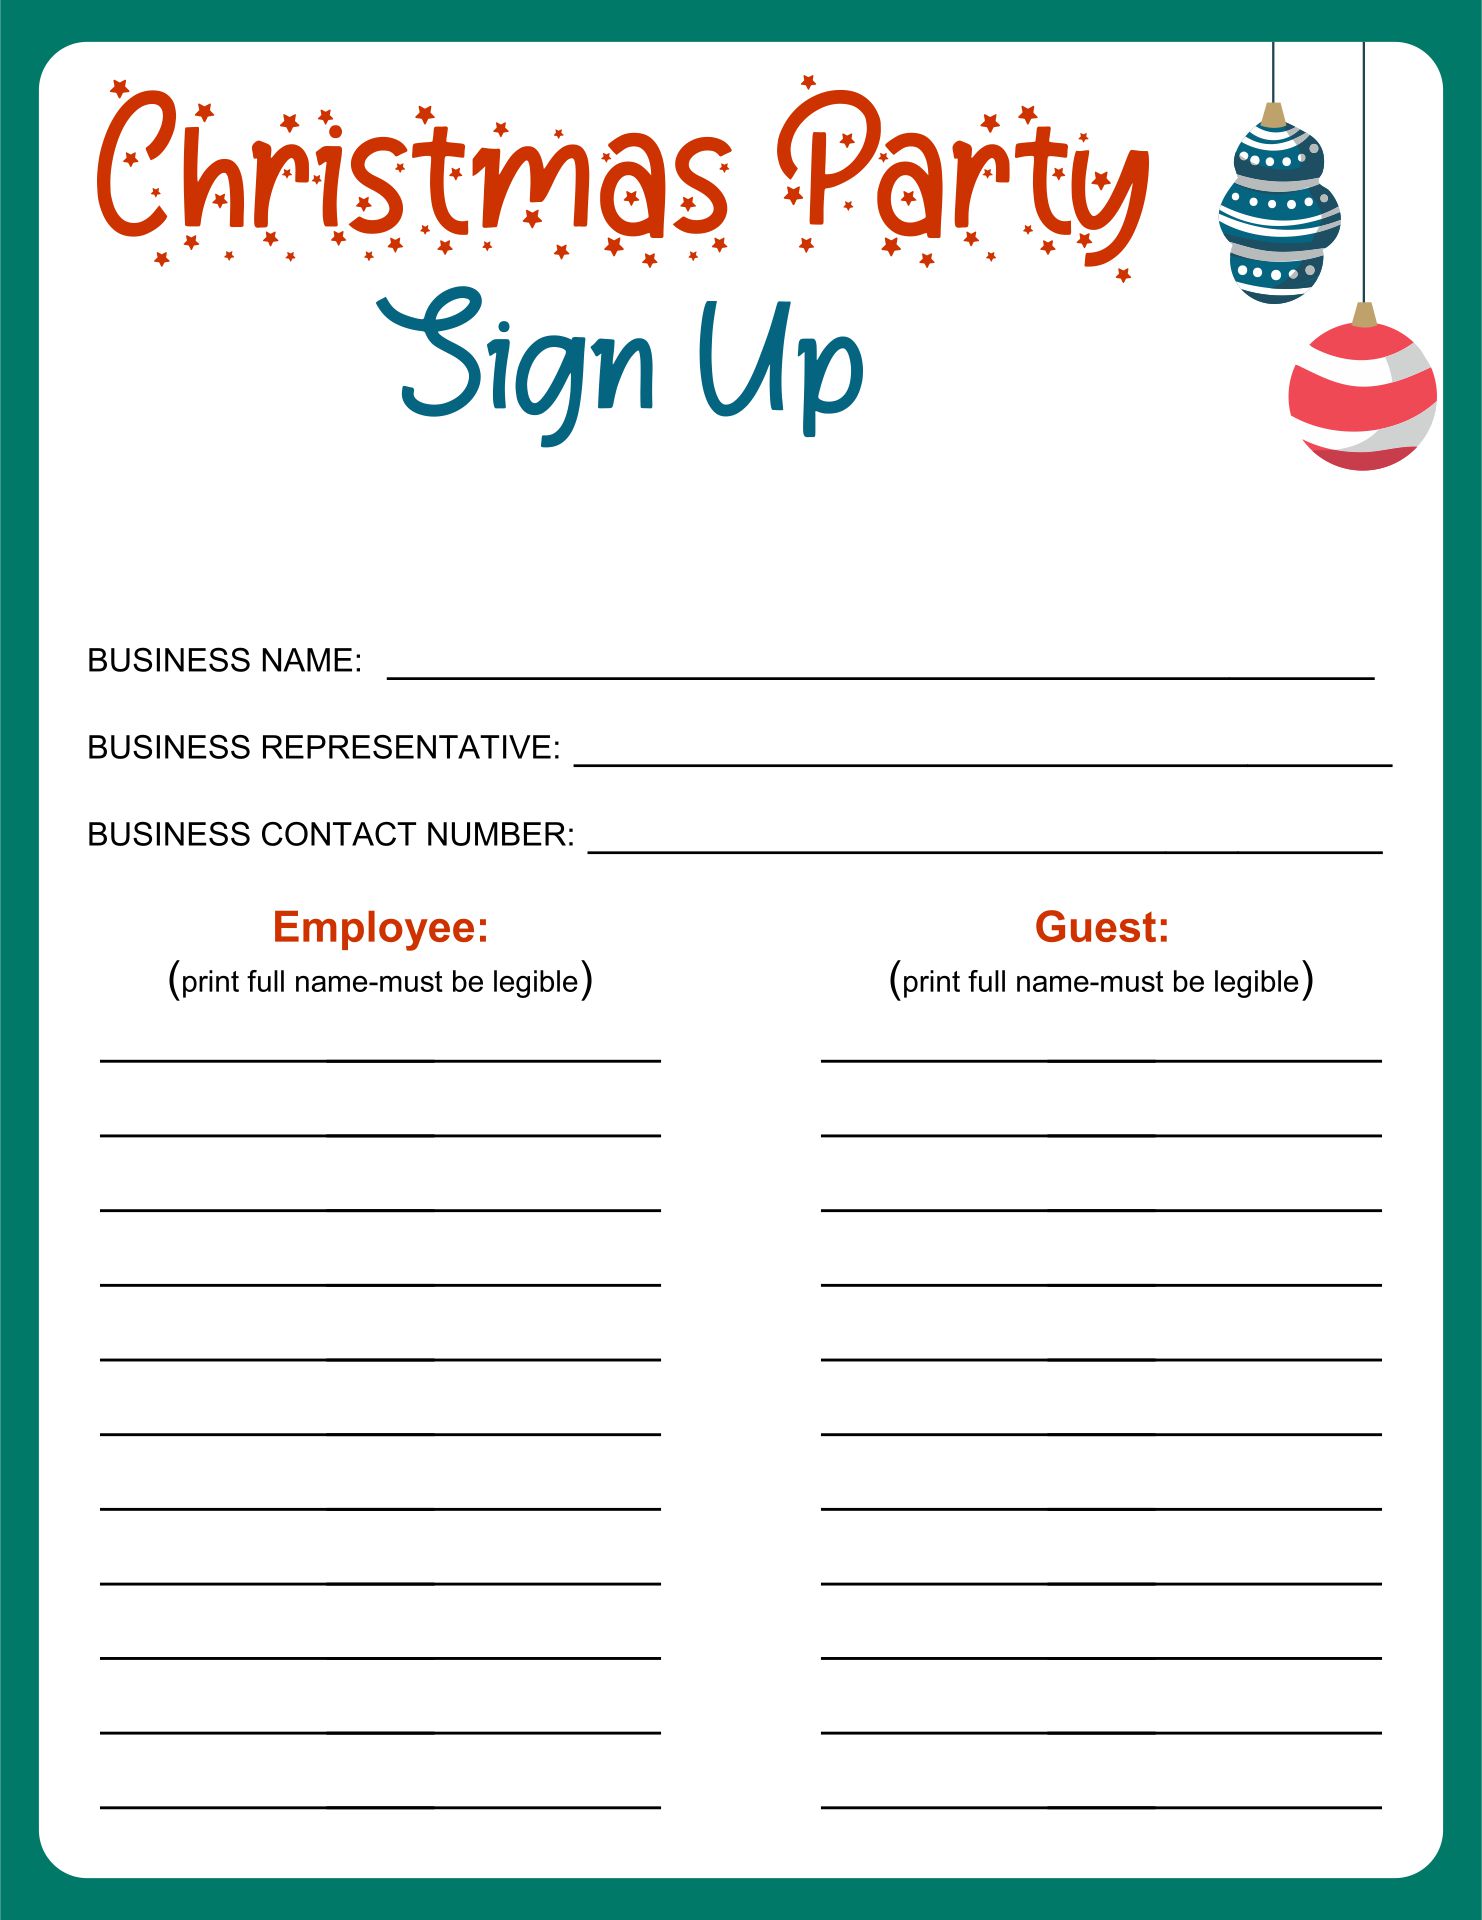 christmas-party-sign-up-sheet-printable-christmas-party-rustic-sexiz-pix